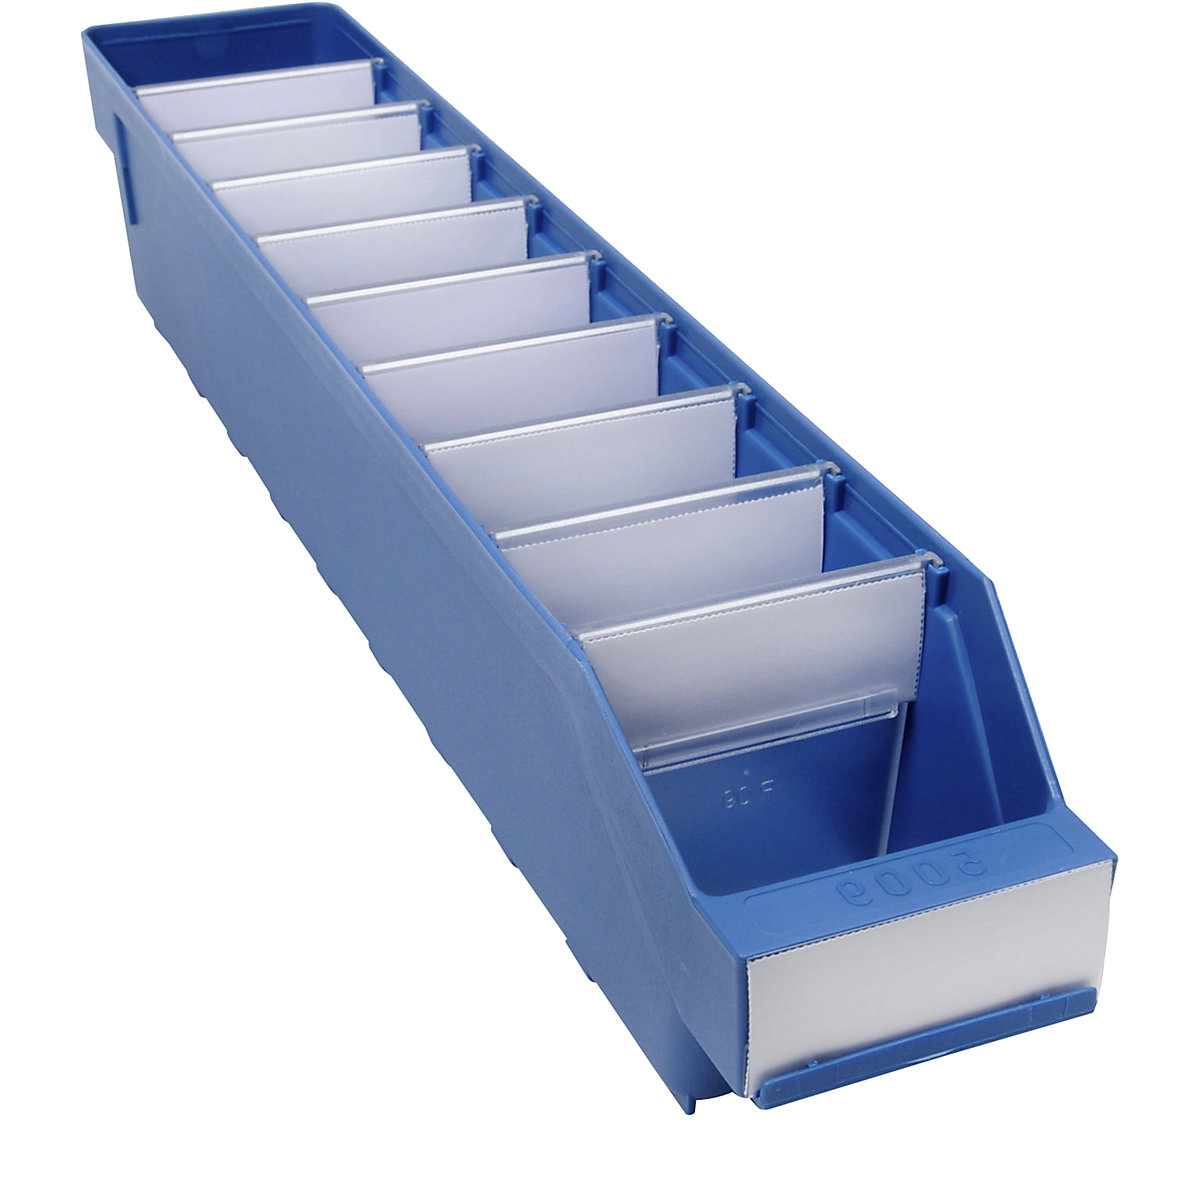 Shelf bin made of highly impact resistant polypropylene – STEMO, blue, LxWxH 500 x 90 x 95 mm, pack of 40-11